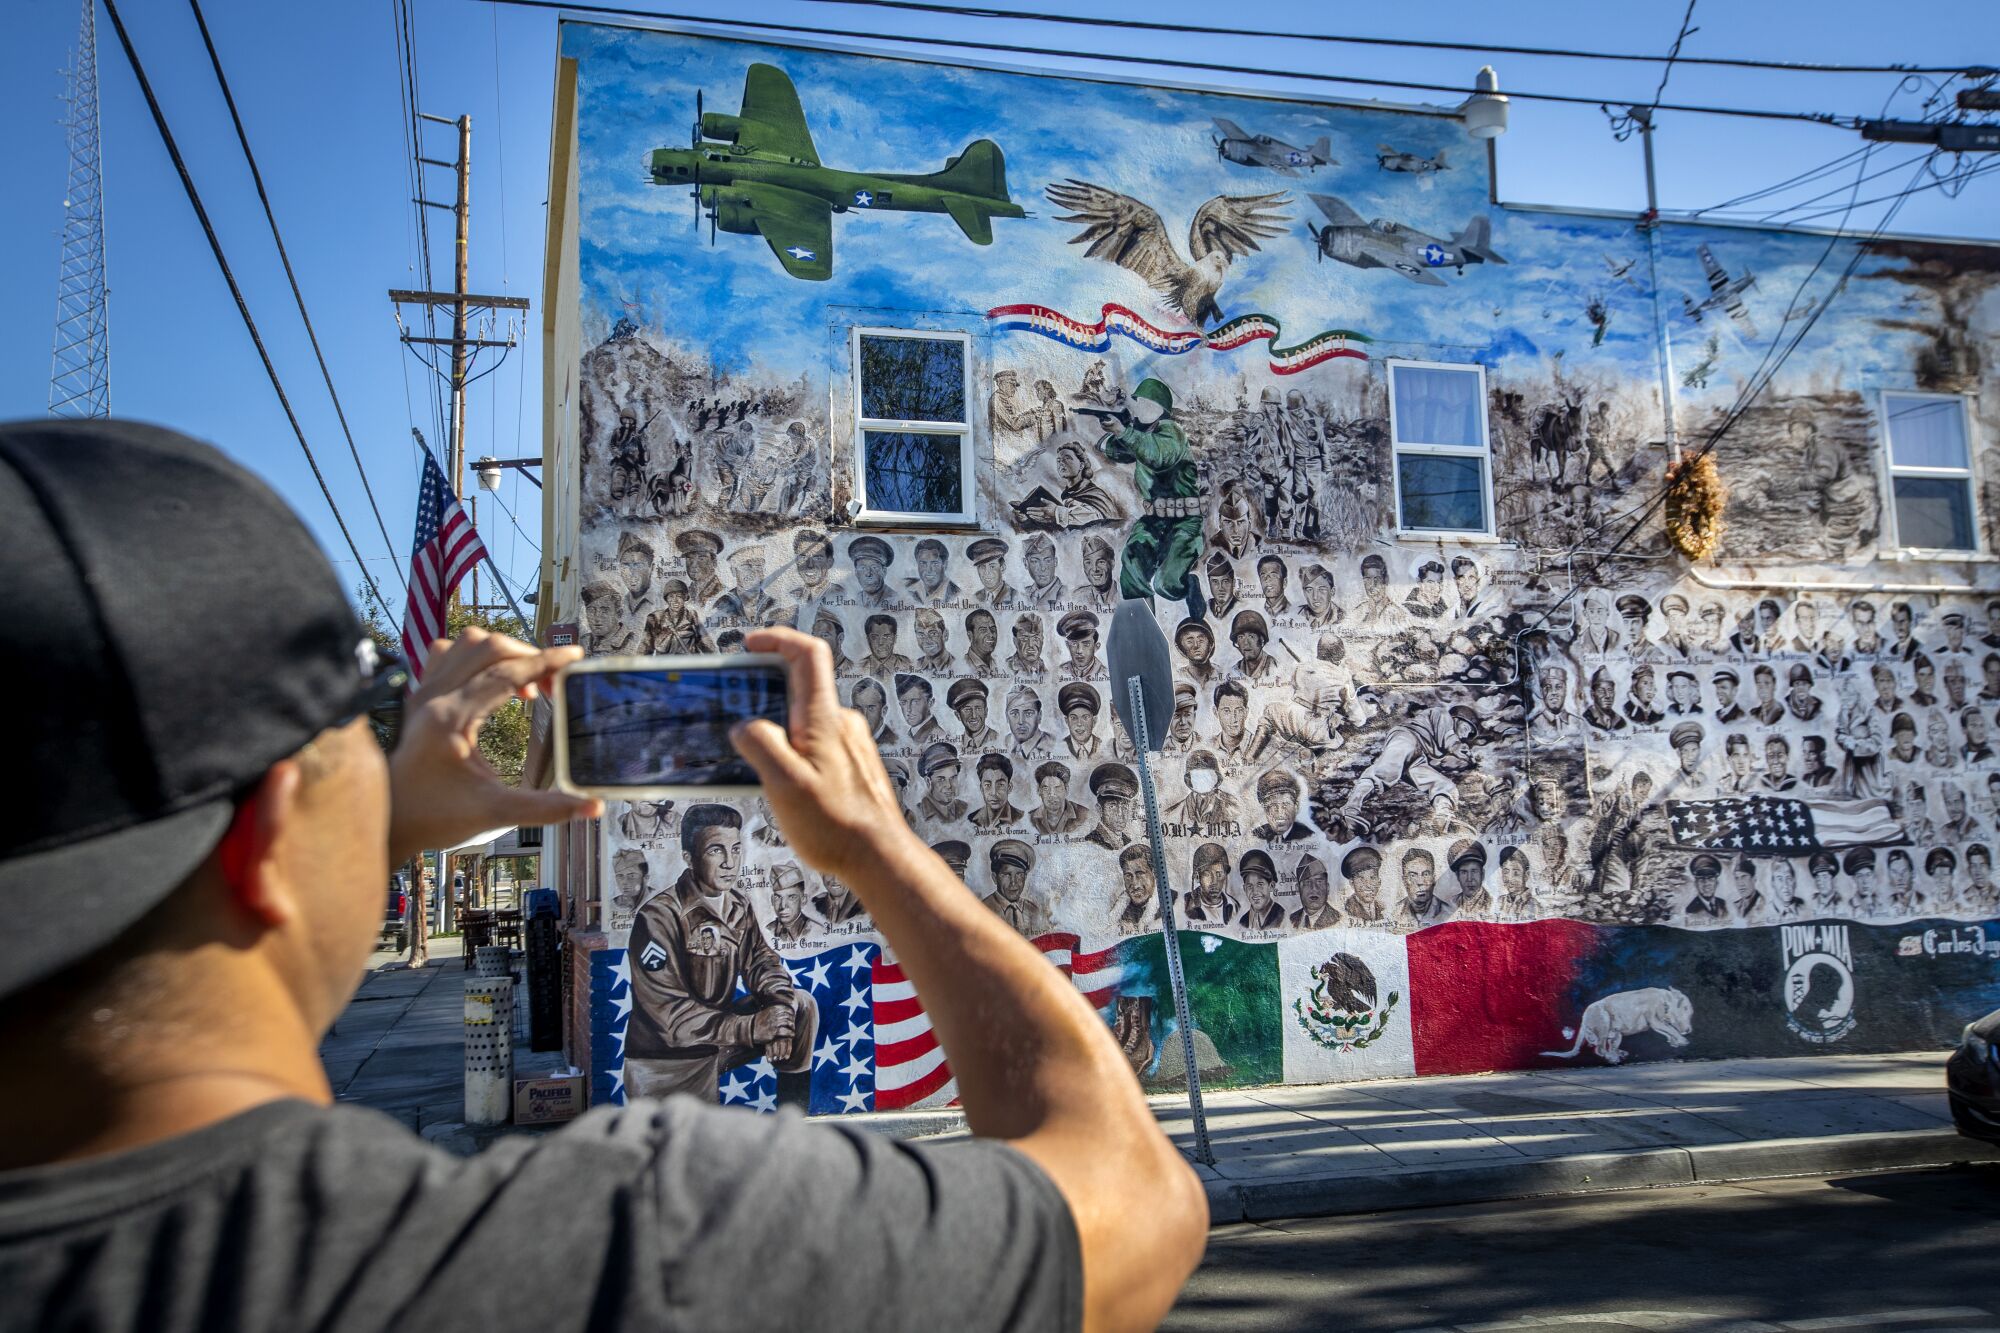 Tommy Cota takes photos of the "Among Heroes" veterans memorial mural outside La Chiquita Grocery in Santa Ana.